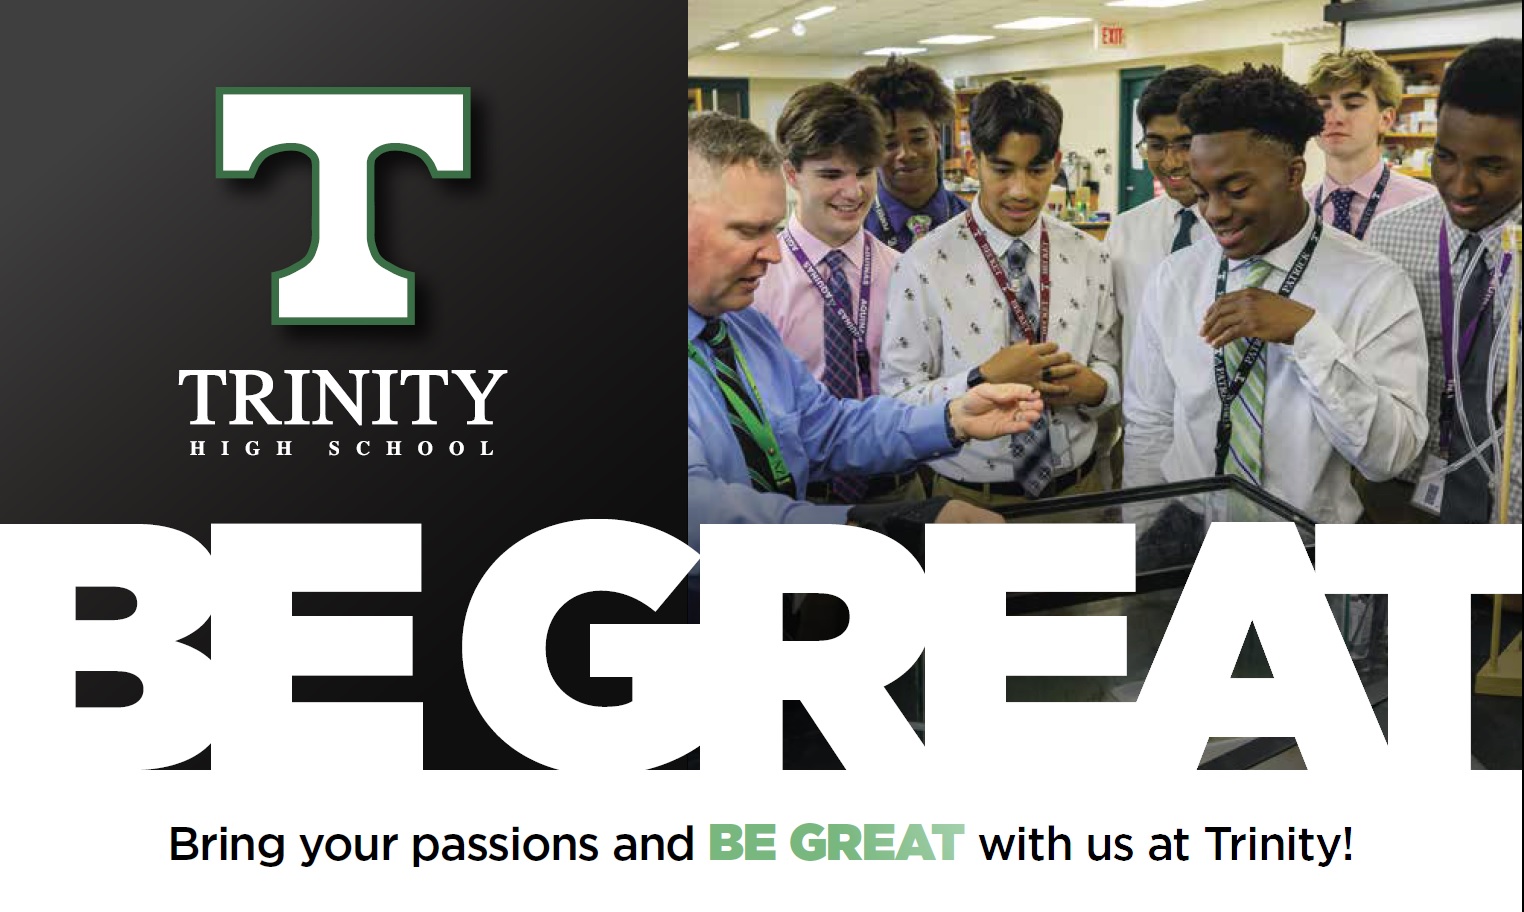 Trinity High School. Be Great bring your passions and be great with us at Trinity! 